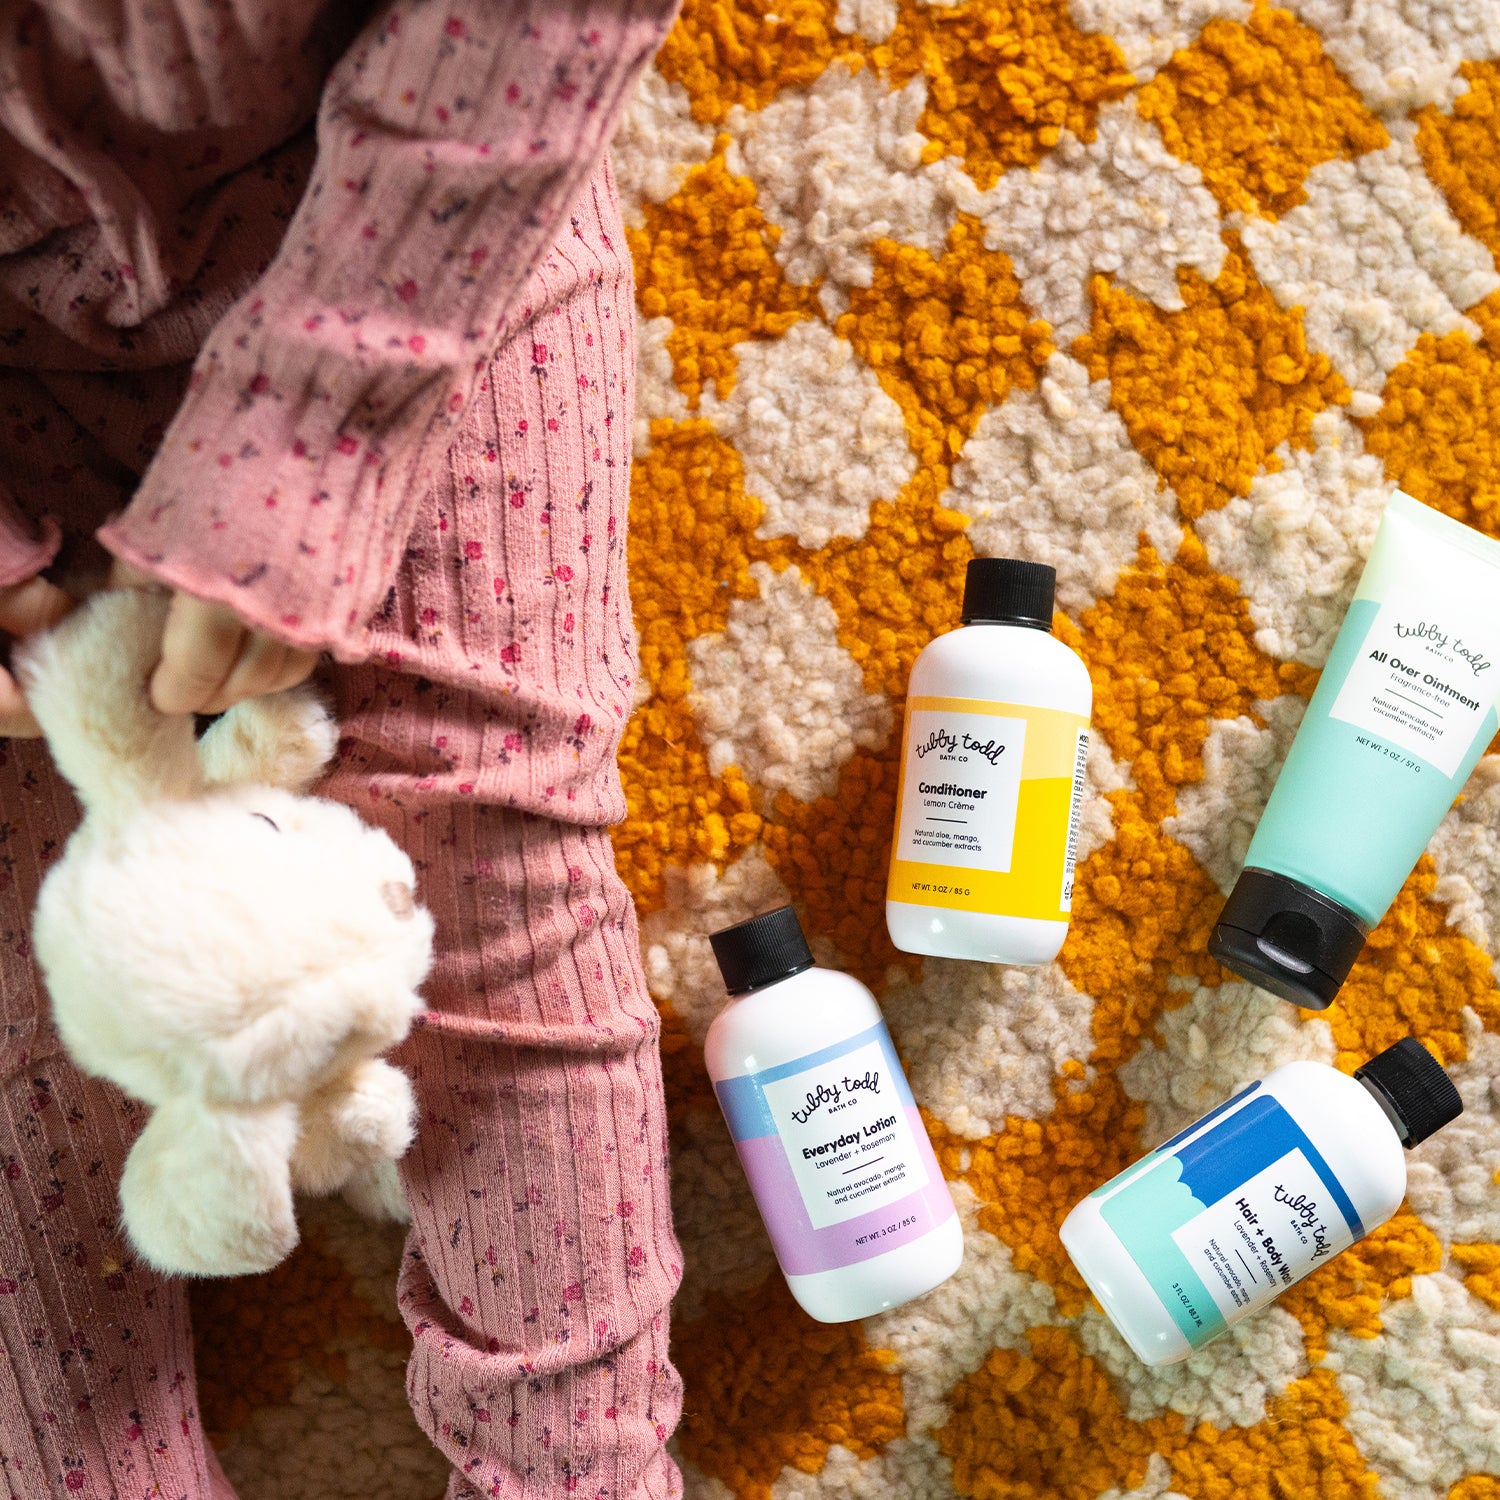 Travel Kit products lying on the colorful carpet and a girl sitting next to them with her rabbit doll.